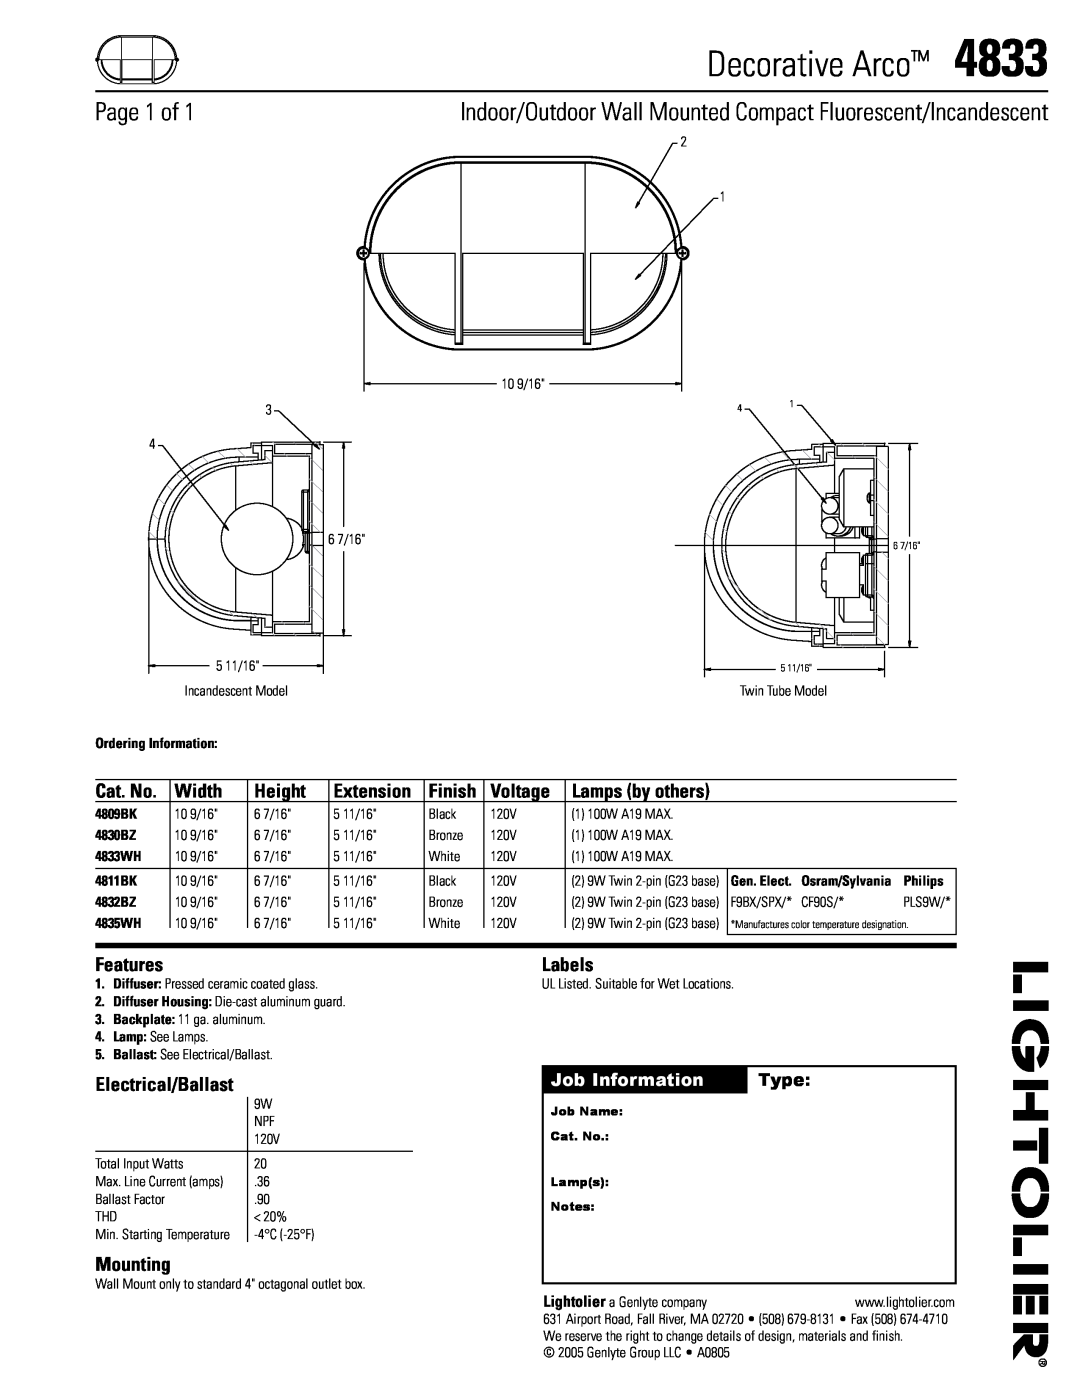 Lightolier 4833 manual Decorative Arco, Page 1 of, Cat. No, Height, Voltage, Features, Labels, Electrical/Ballast, Width 